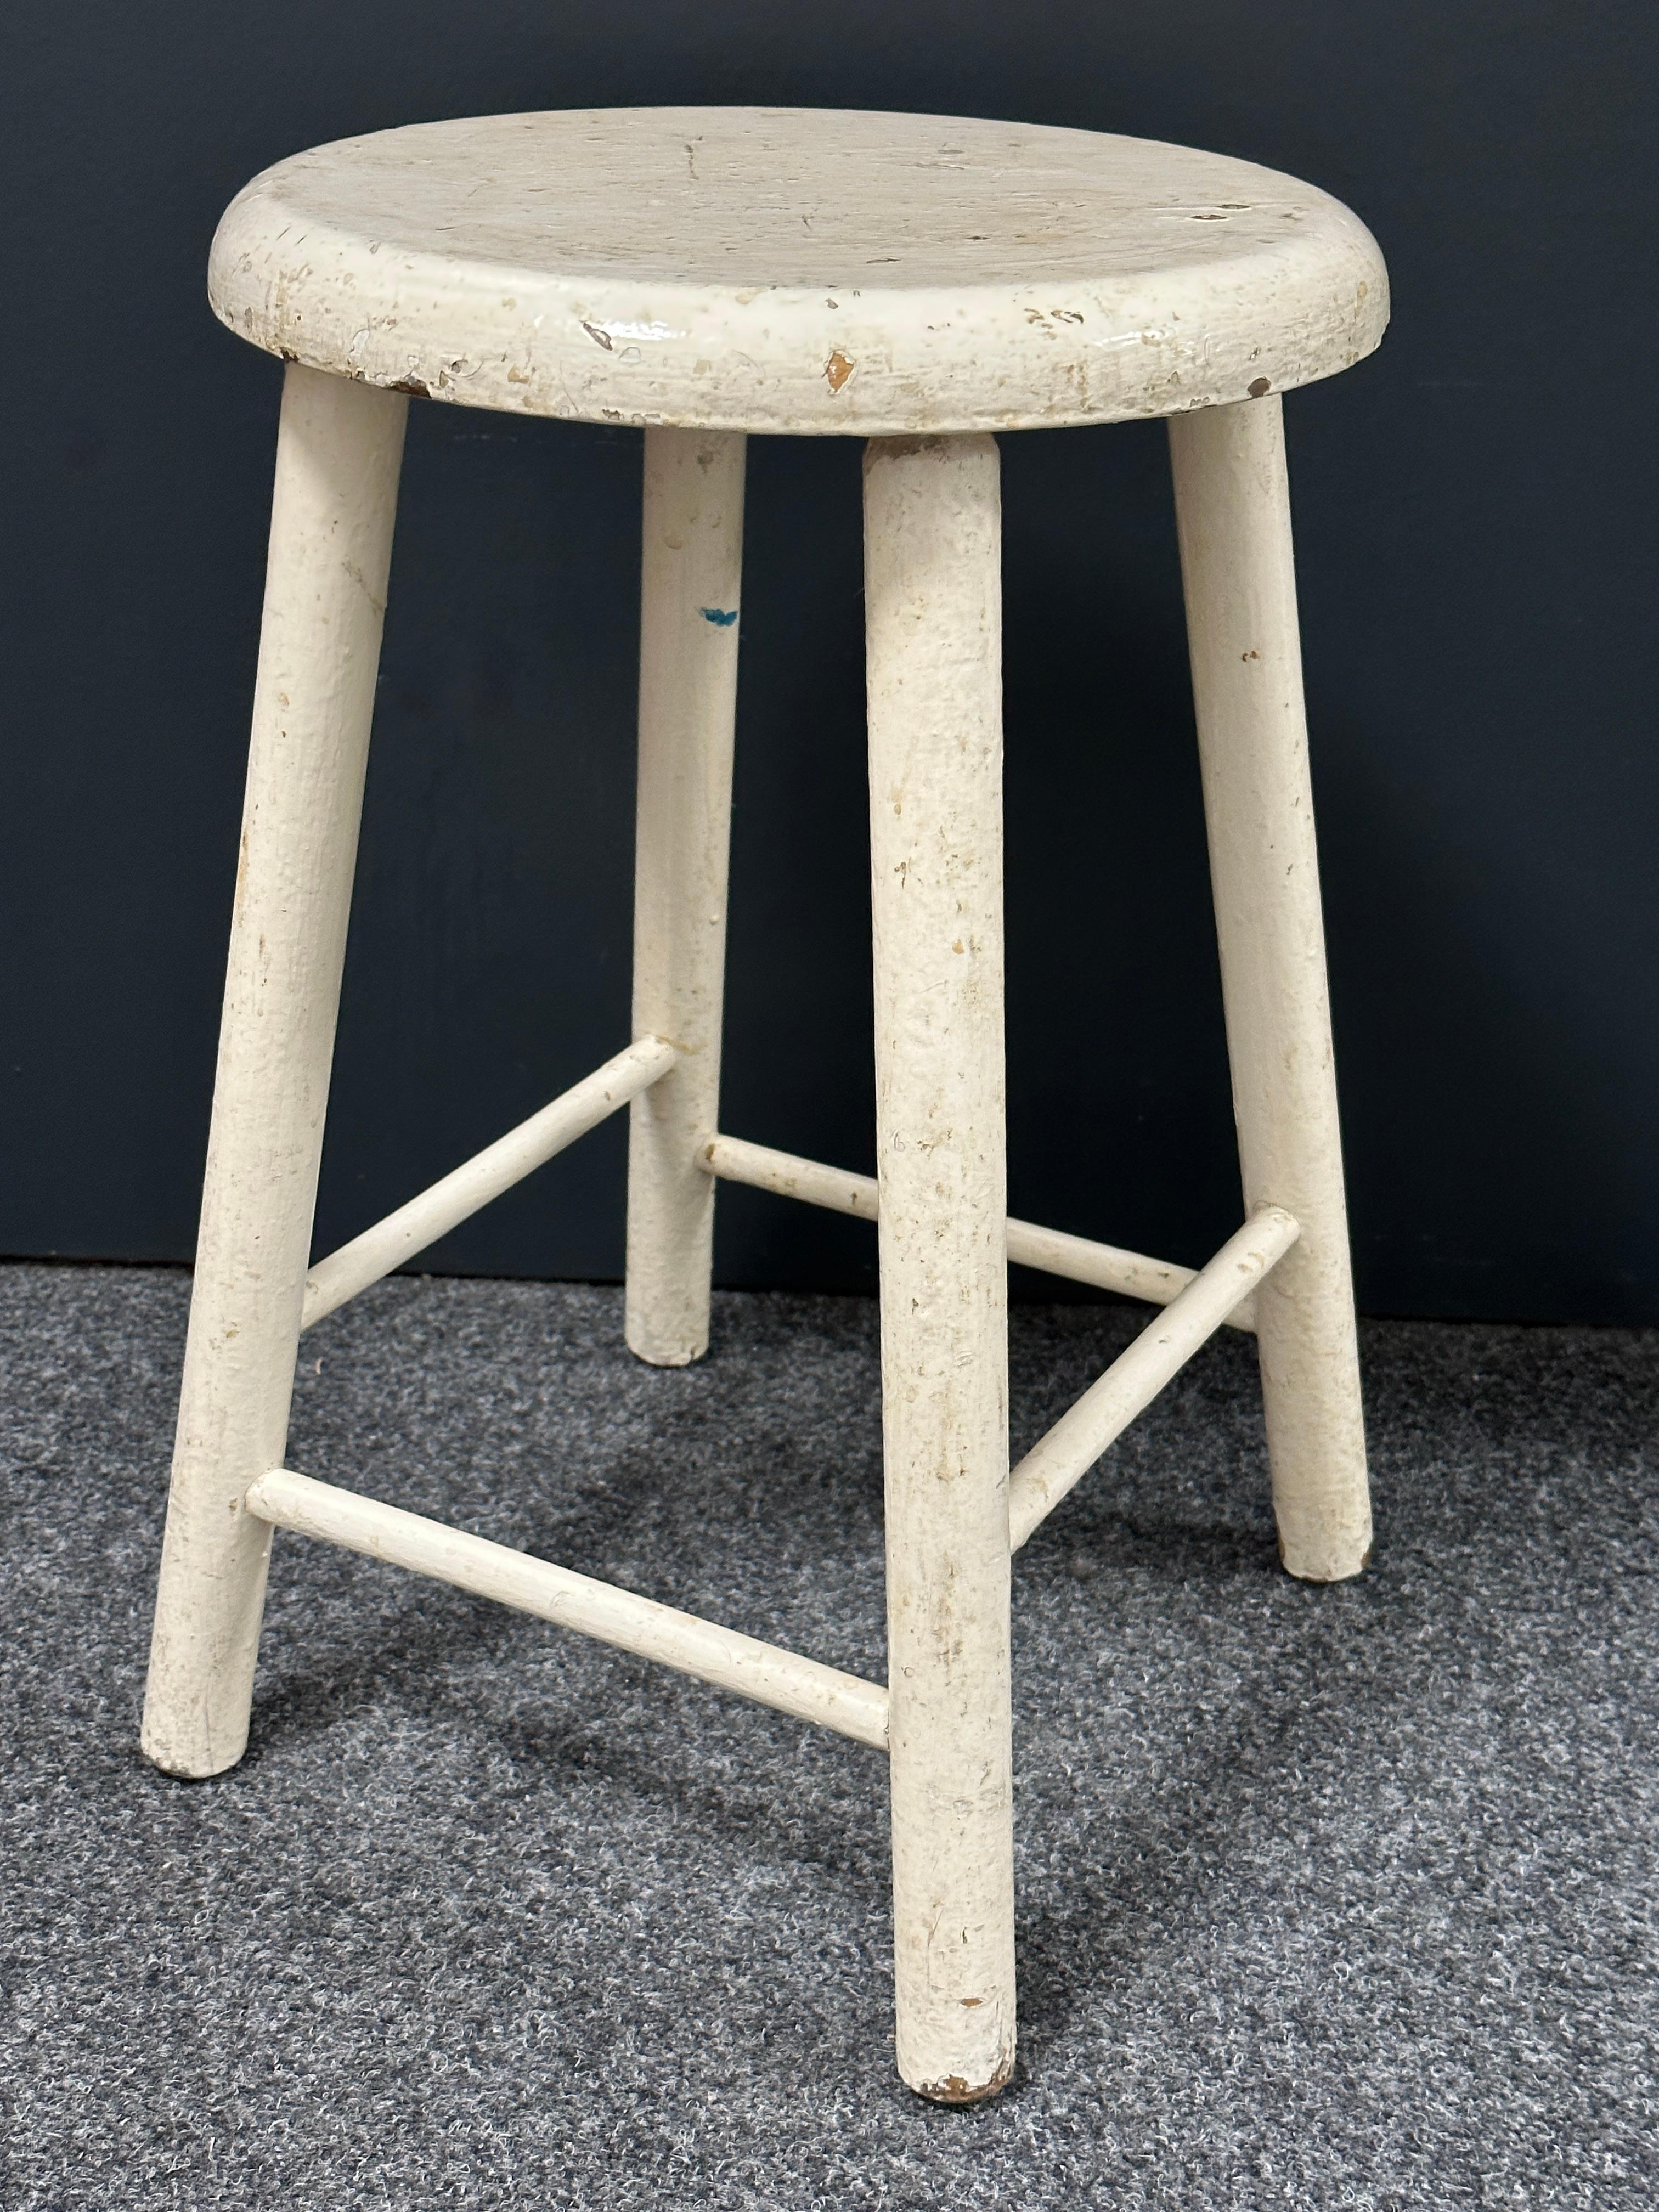 Hand-Crafted 20th Century Wabi Sabi 4 Leg Stool, Germany circa 1930s or Older For Sale